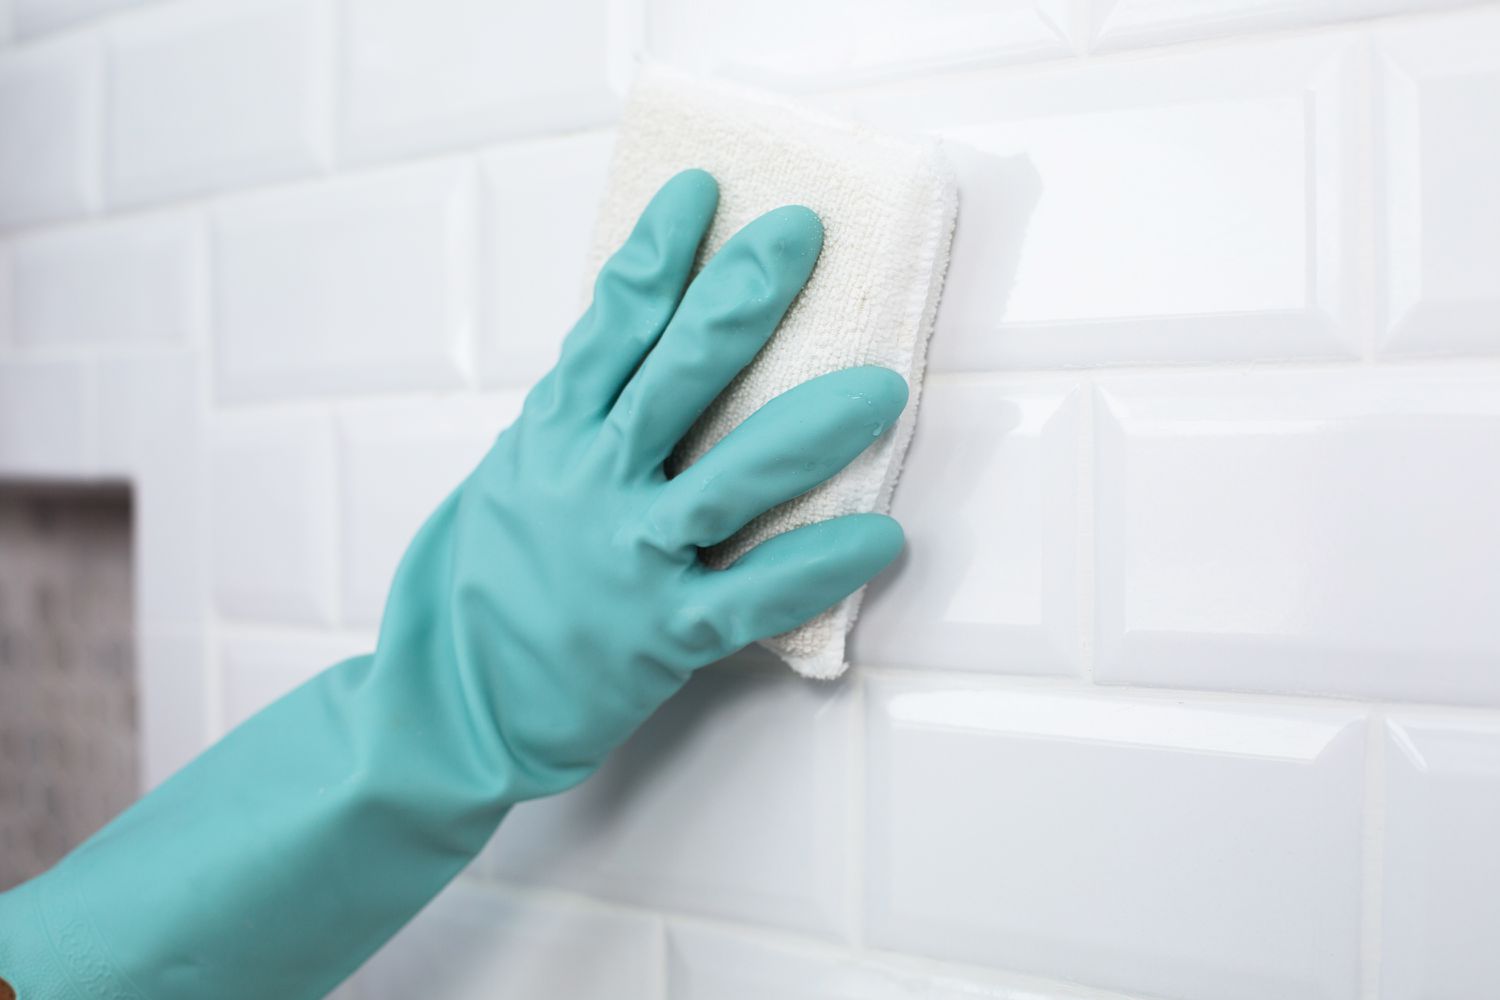 Grout haze cleaned off white tiled wall with white sponge and teal gloves